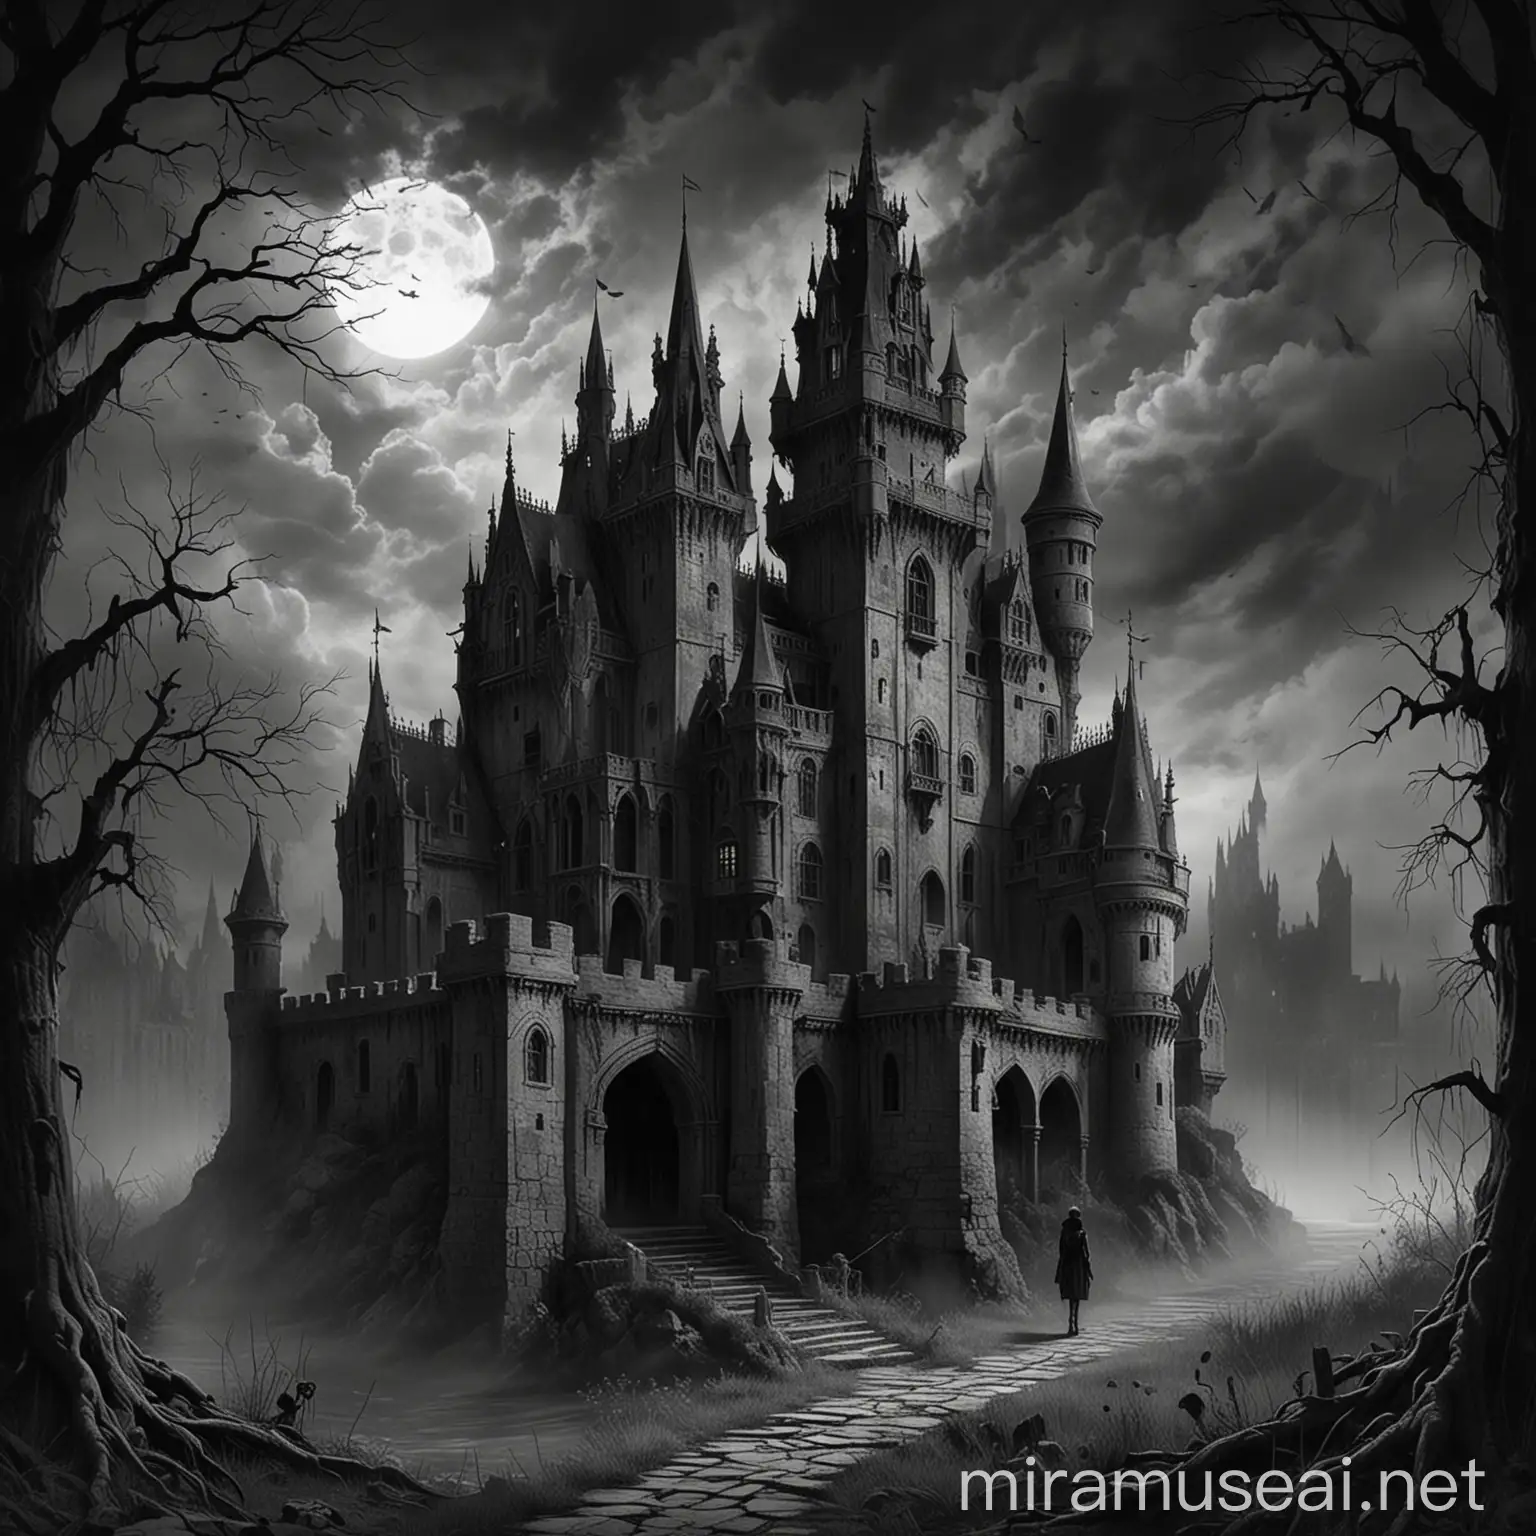 Explore Gothic themes and imagery in your sketches, inspired by the darker, more mysterious side of Romanticism. Create scenes of haunted castles, eerie landscapes, or supernatural encounters.